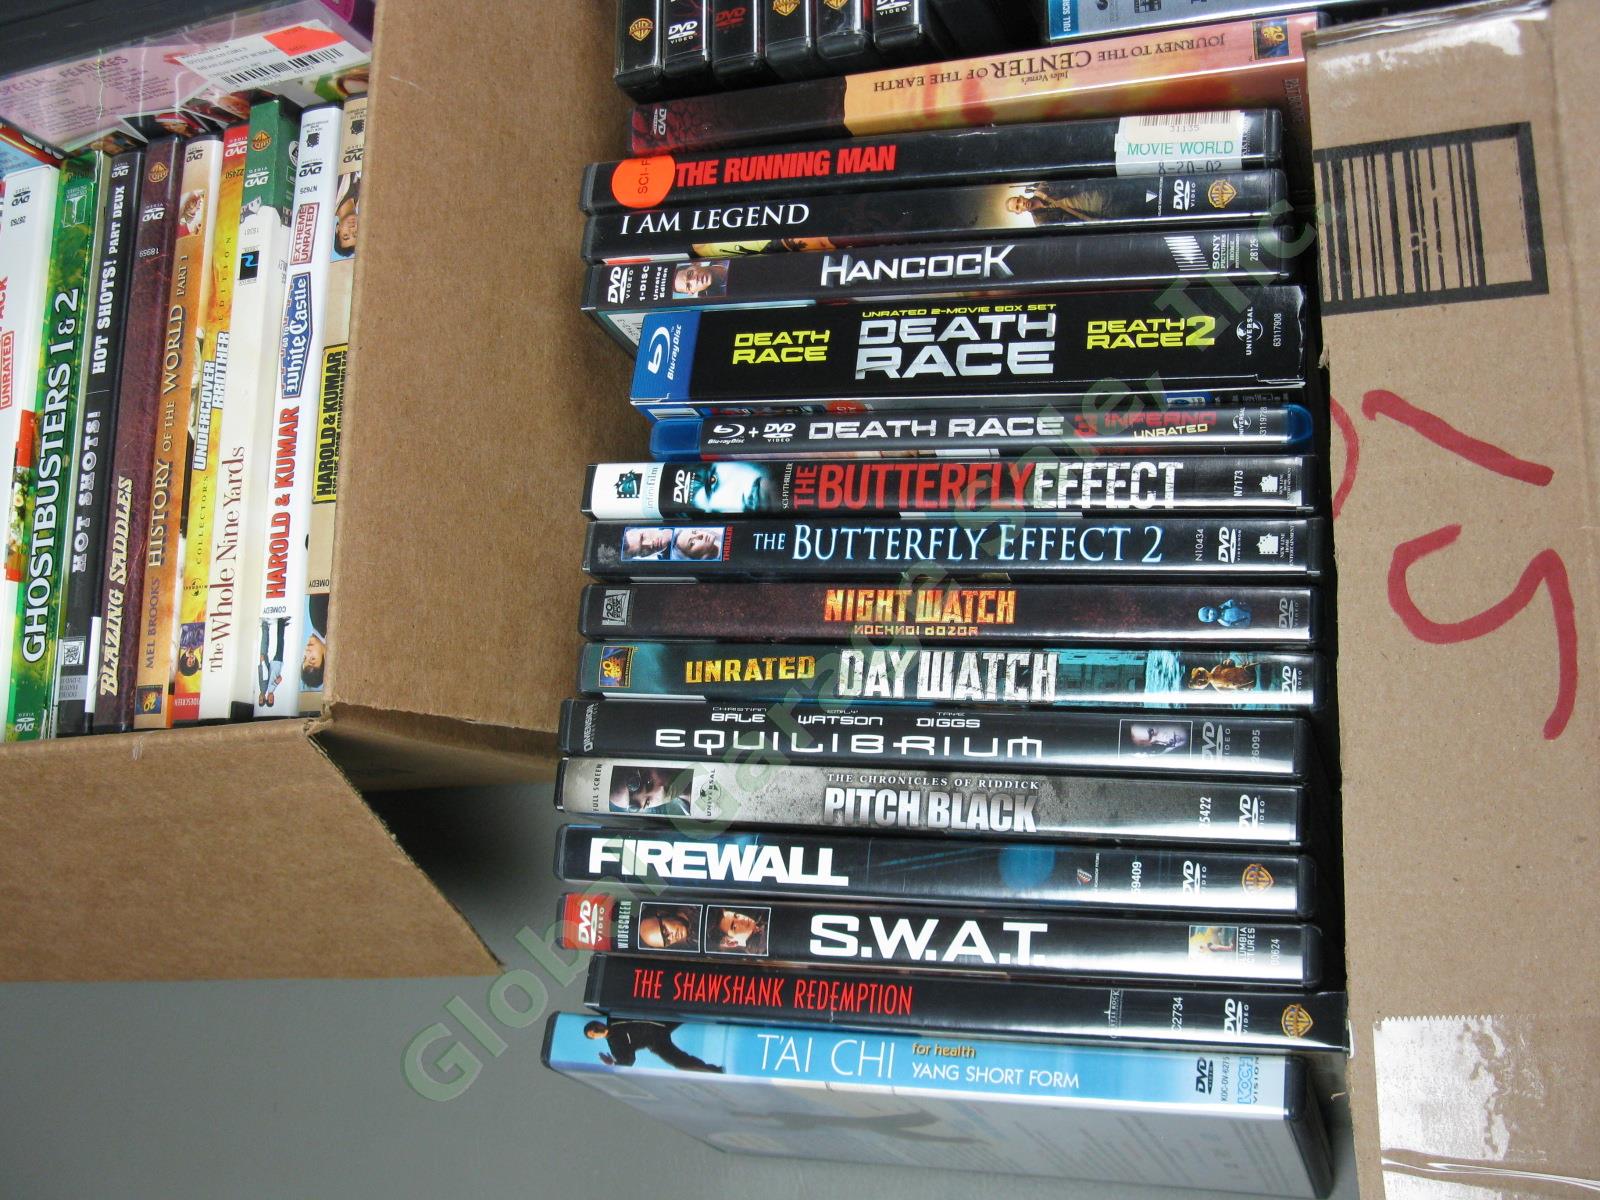 HUGE Mixed Assorted Blu-Ray DVD Collection Movies TV Series Seasons Box Sets +++ 6